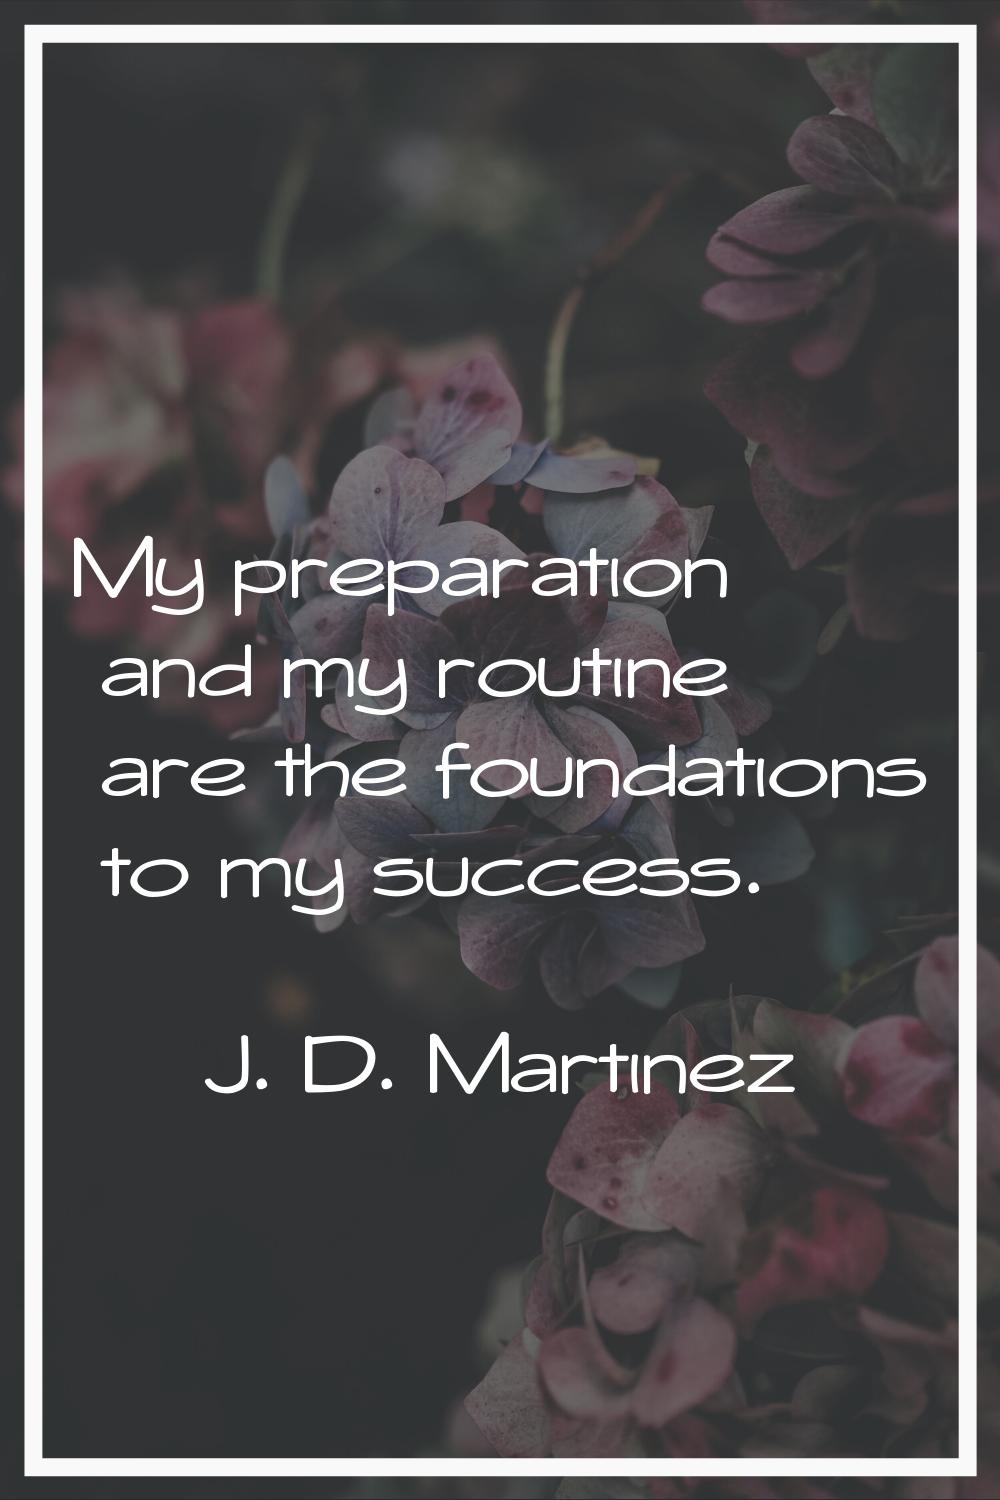 My preparation and my routine are the foundations to my success.